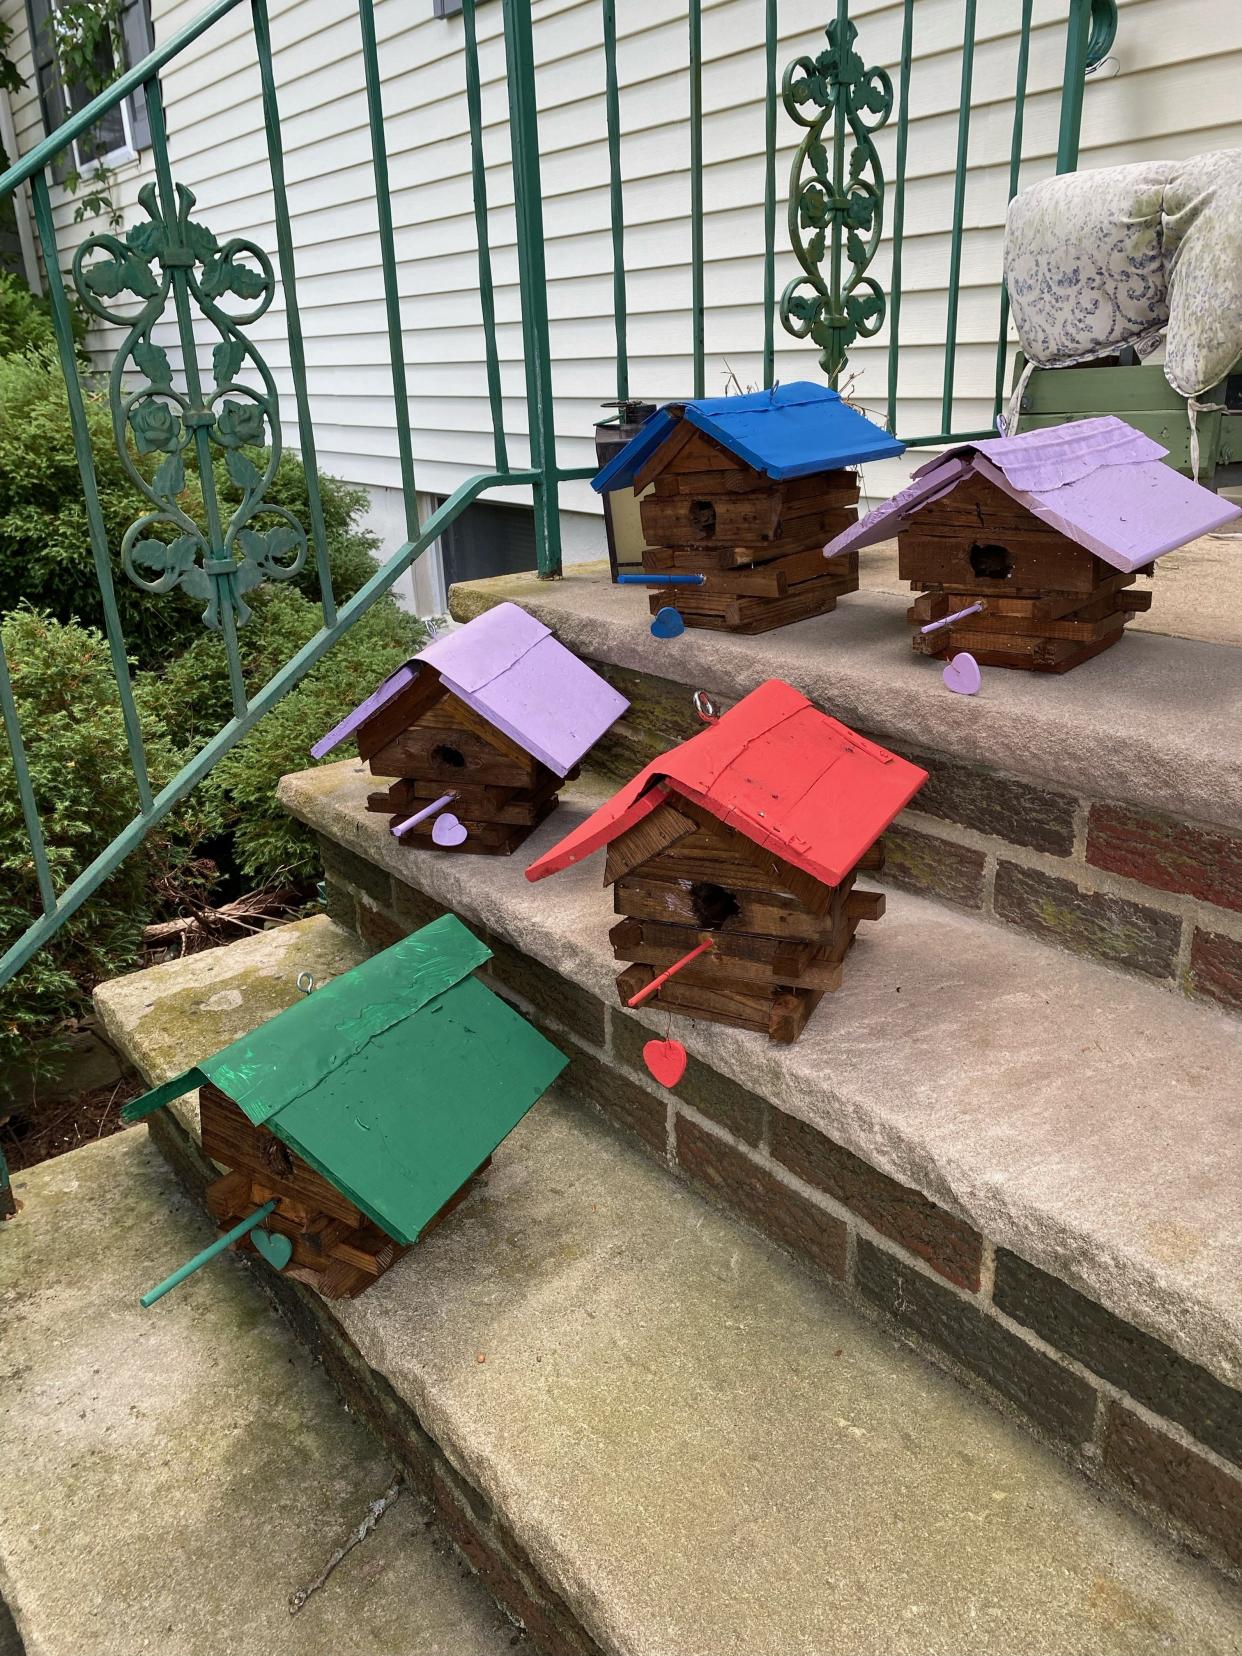 Known for his brightly colored log cabin birdhouses, James Sodano said he makes then because "they make people happy."